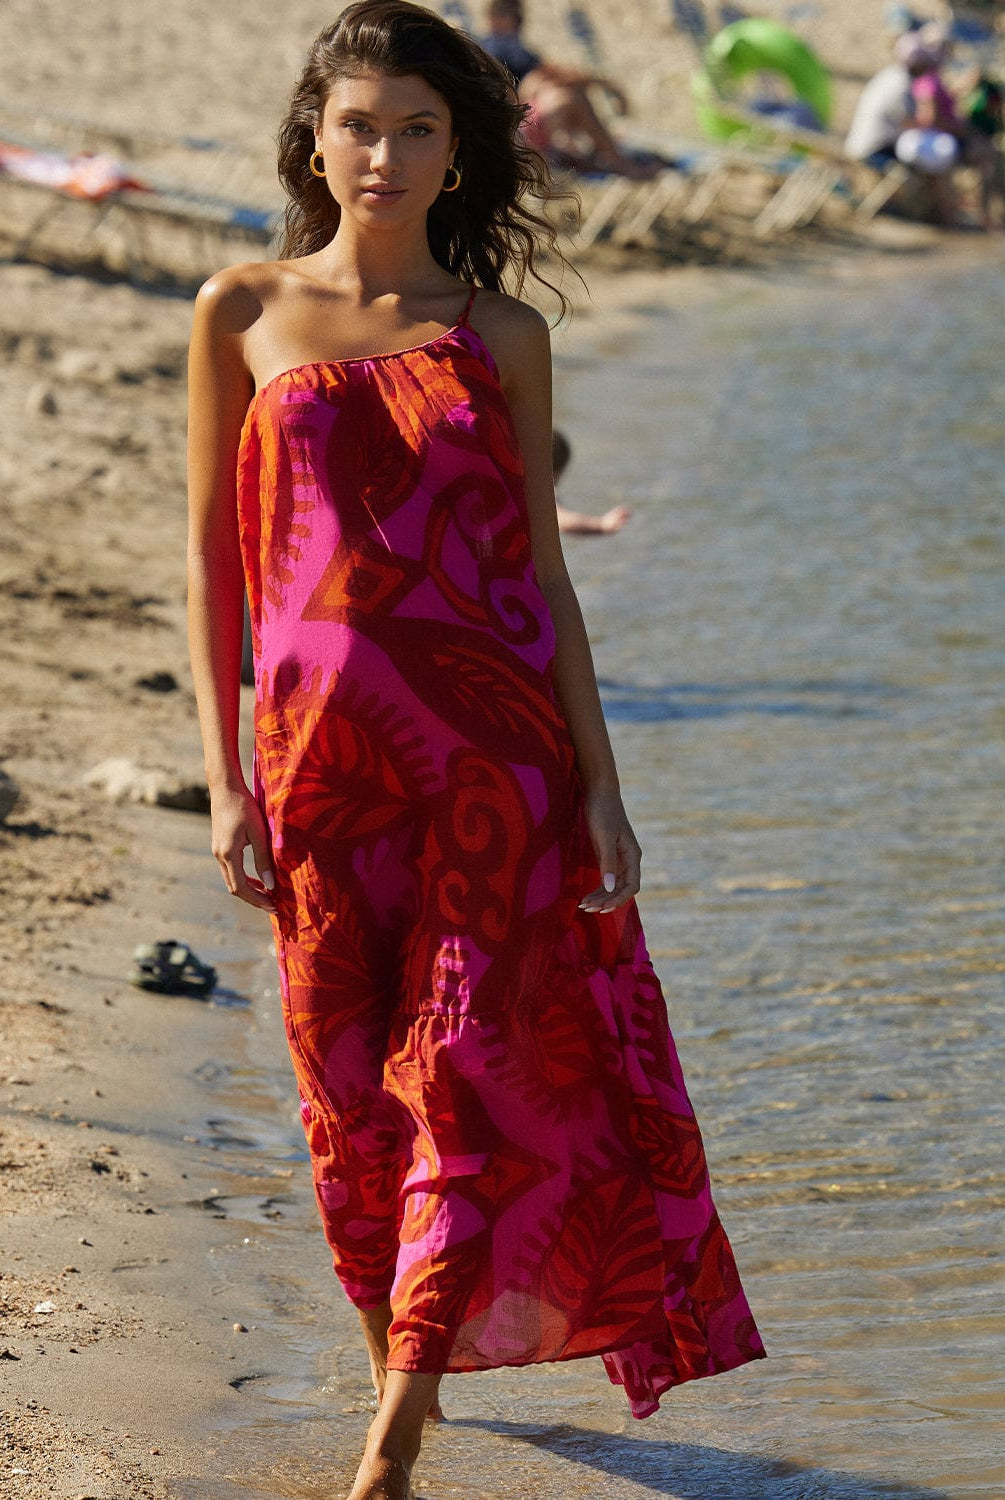 Brunette woman wearing an ankle length dress with one shoulder strap. She is walking on the beach near a lake.